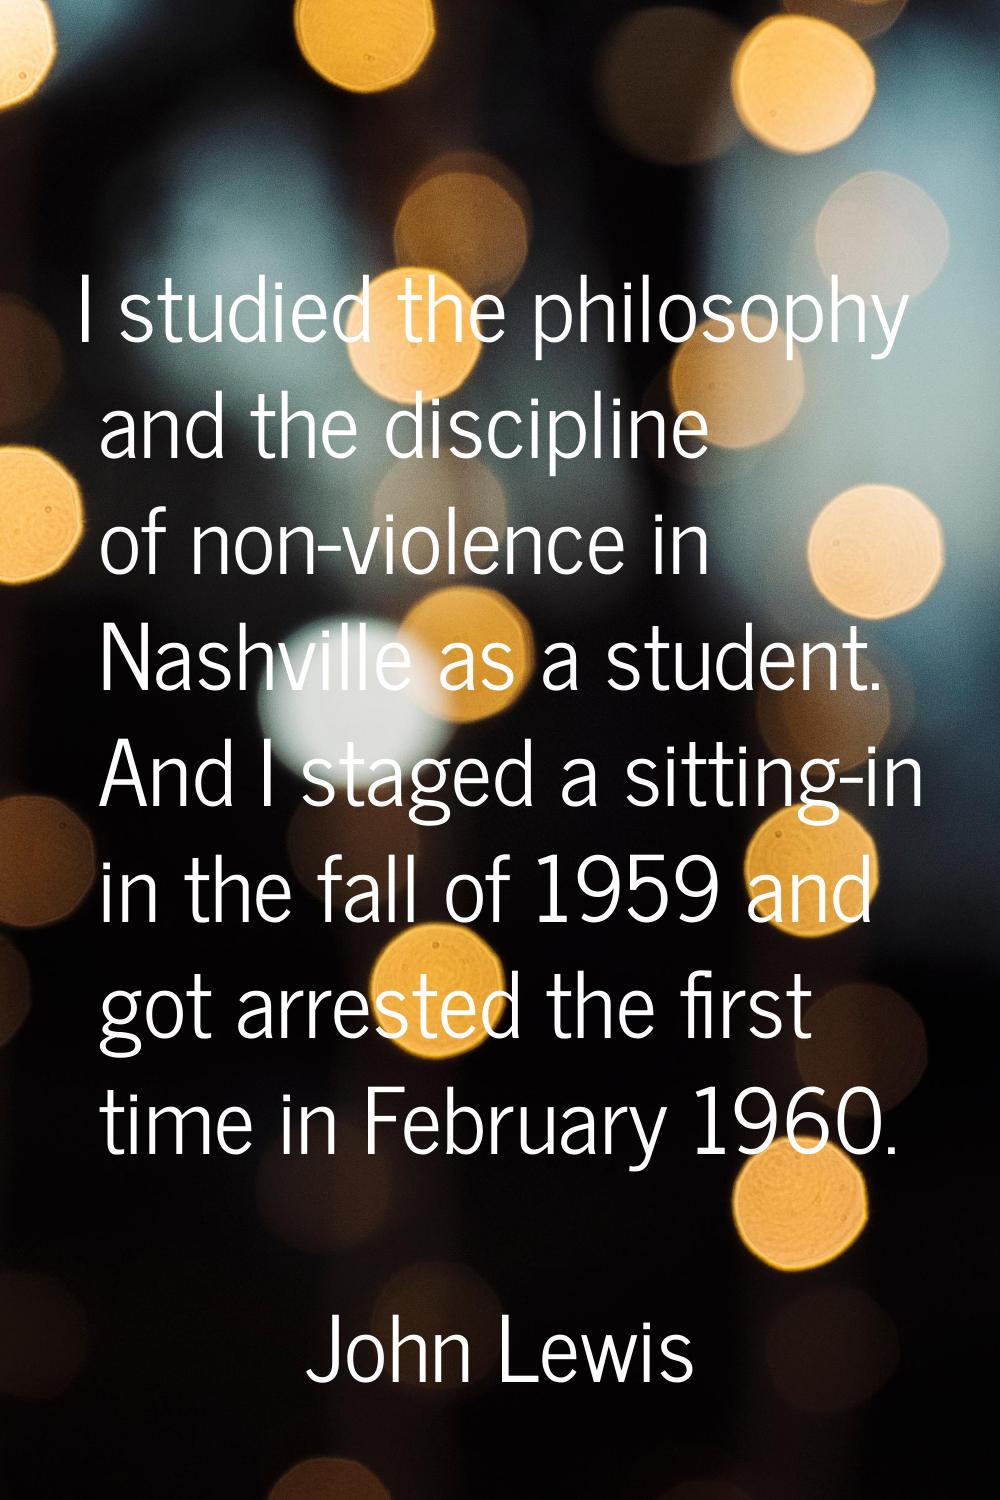 I studied the philosophy and the discipline of non-violence in Nashville as a student. And I staged